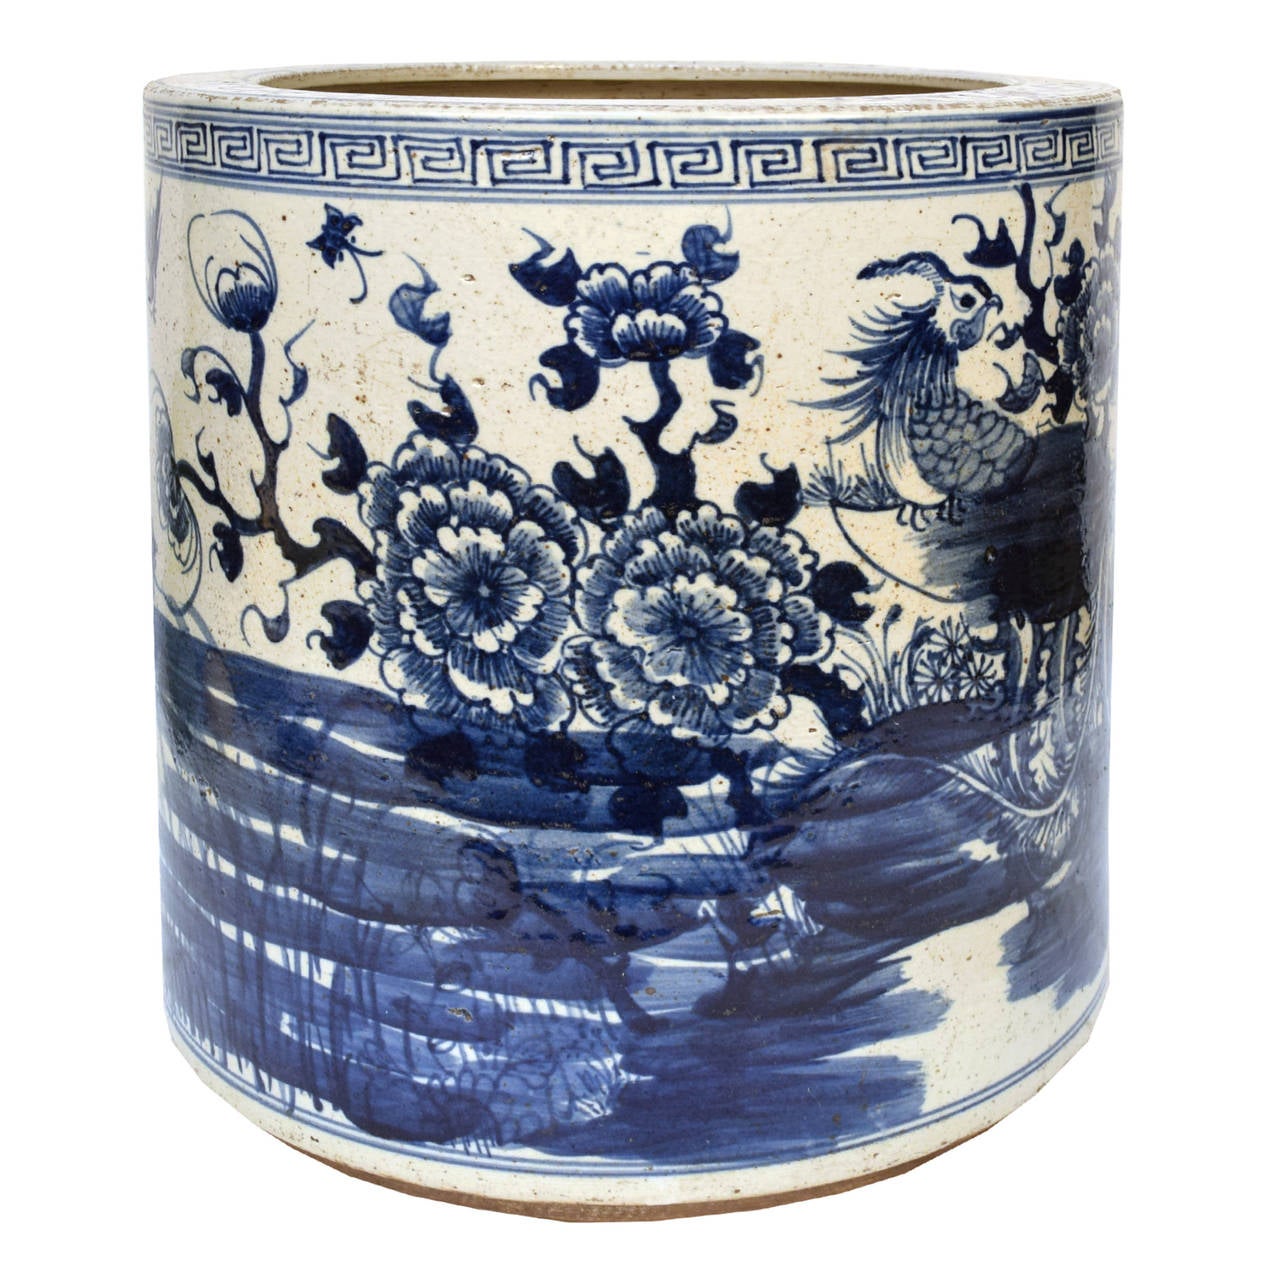 A blue and white water pot from Northern China painted with a scene of phoenix amongst flowers and vines.

        